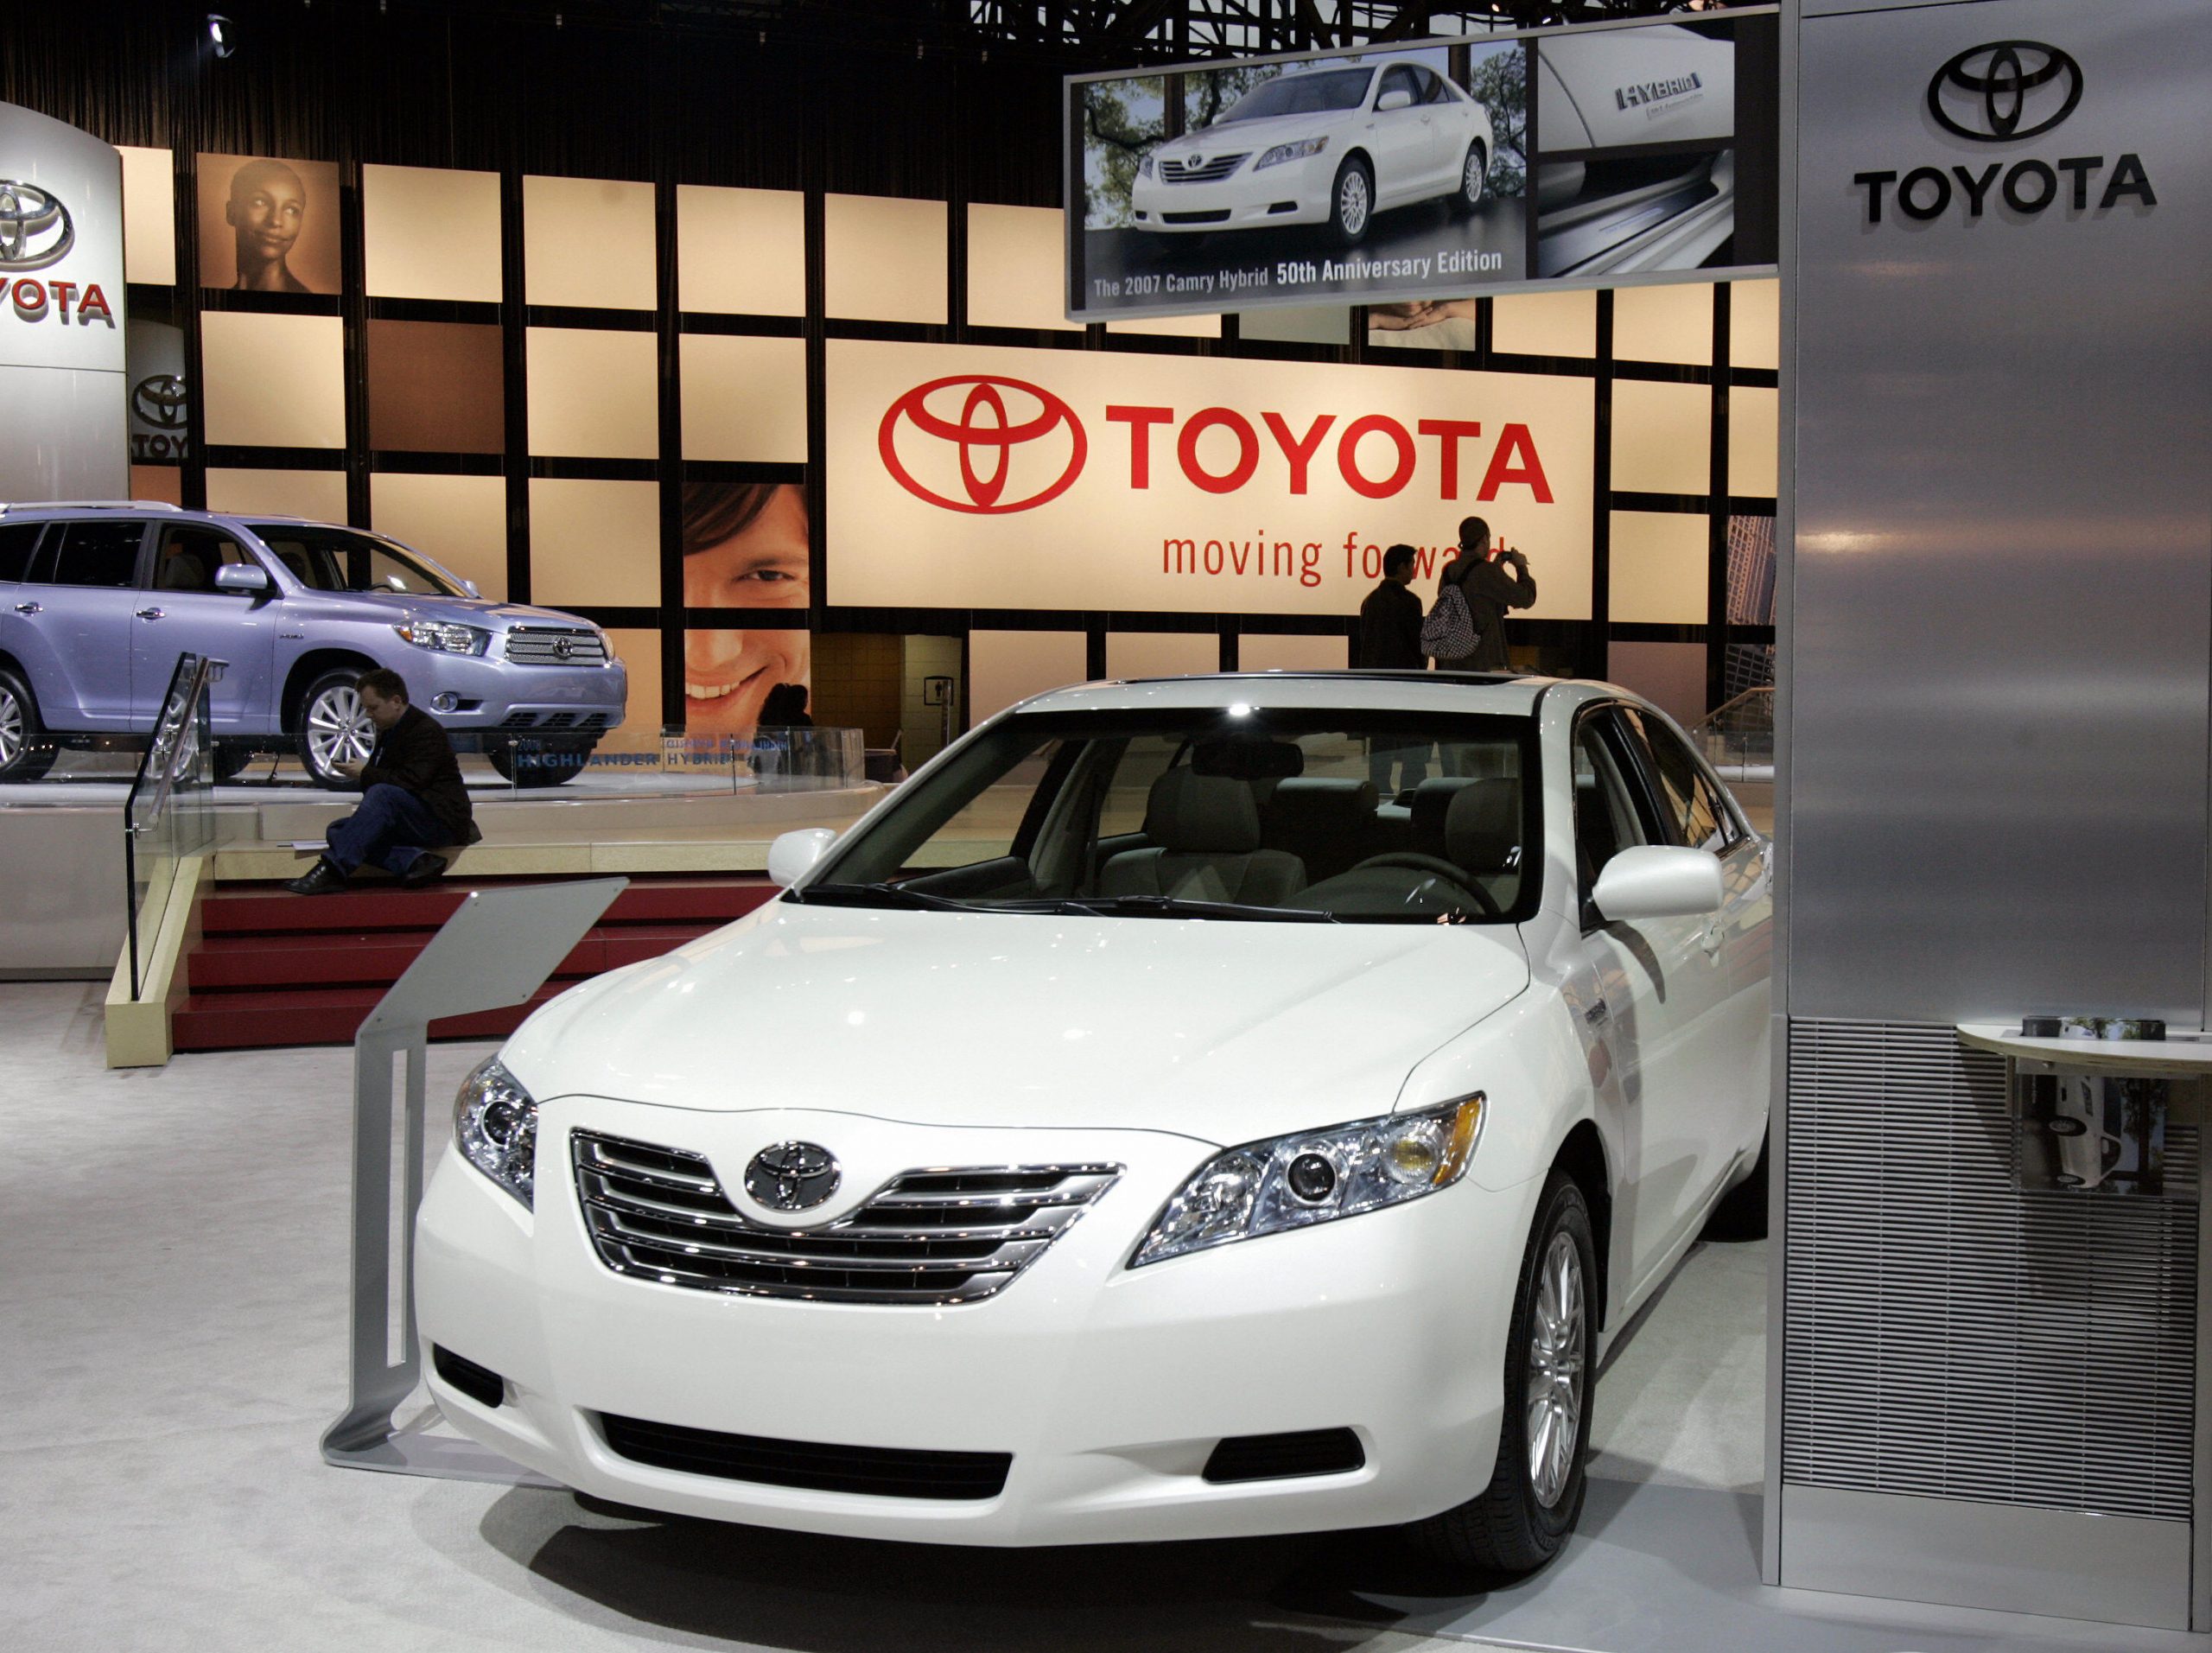 A white Toyota Corolla on display at an auto show